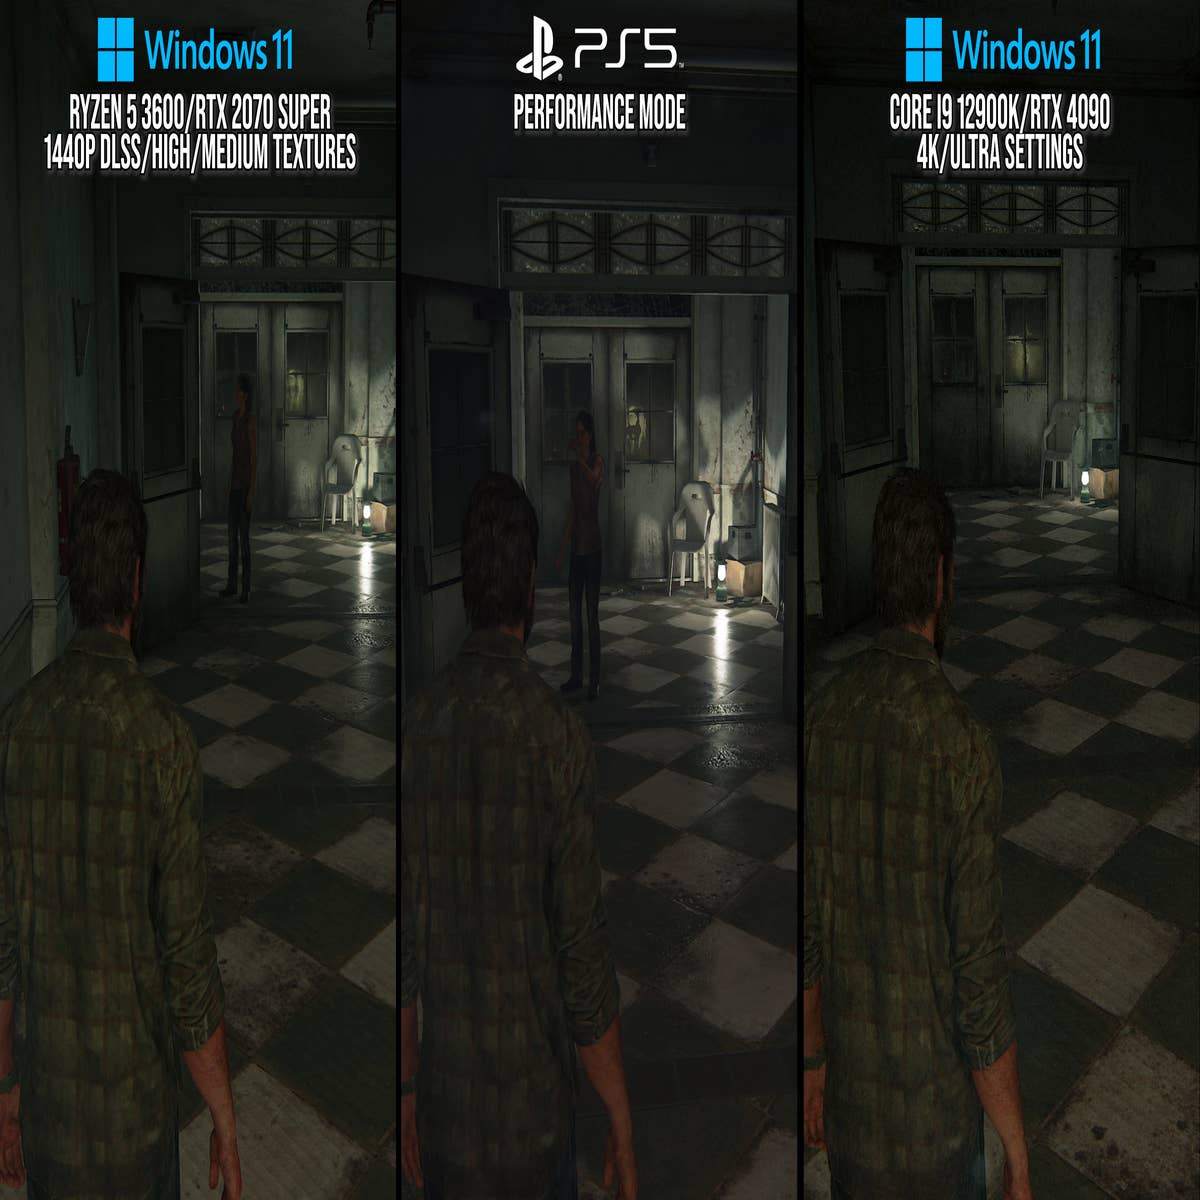 Is Last of Us for PC optimised now? : r/pcgaming